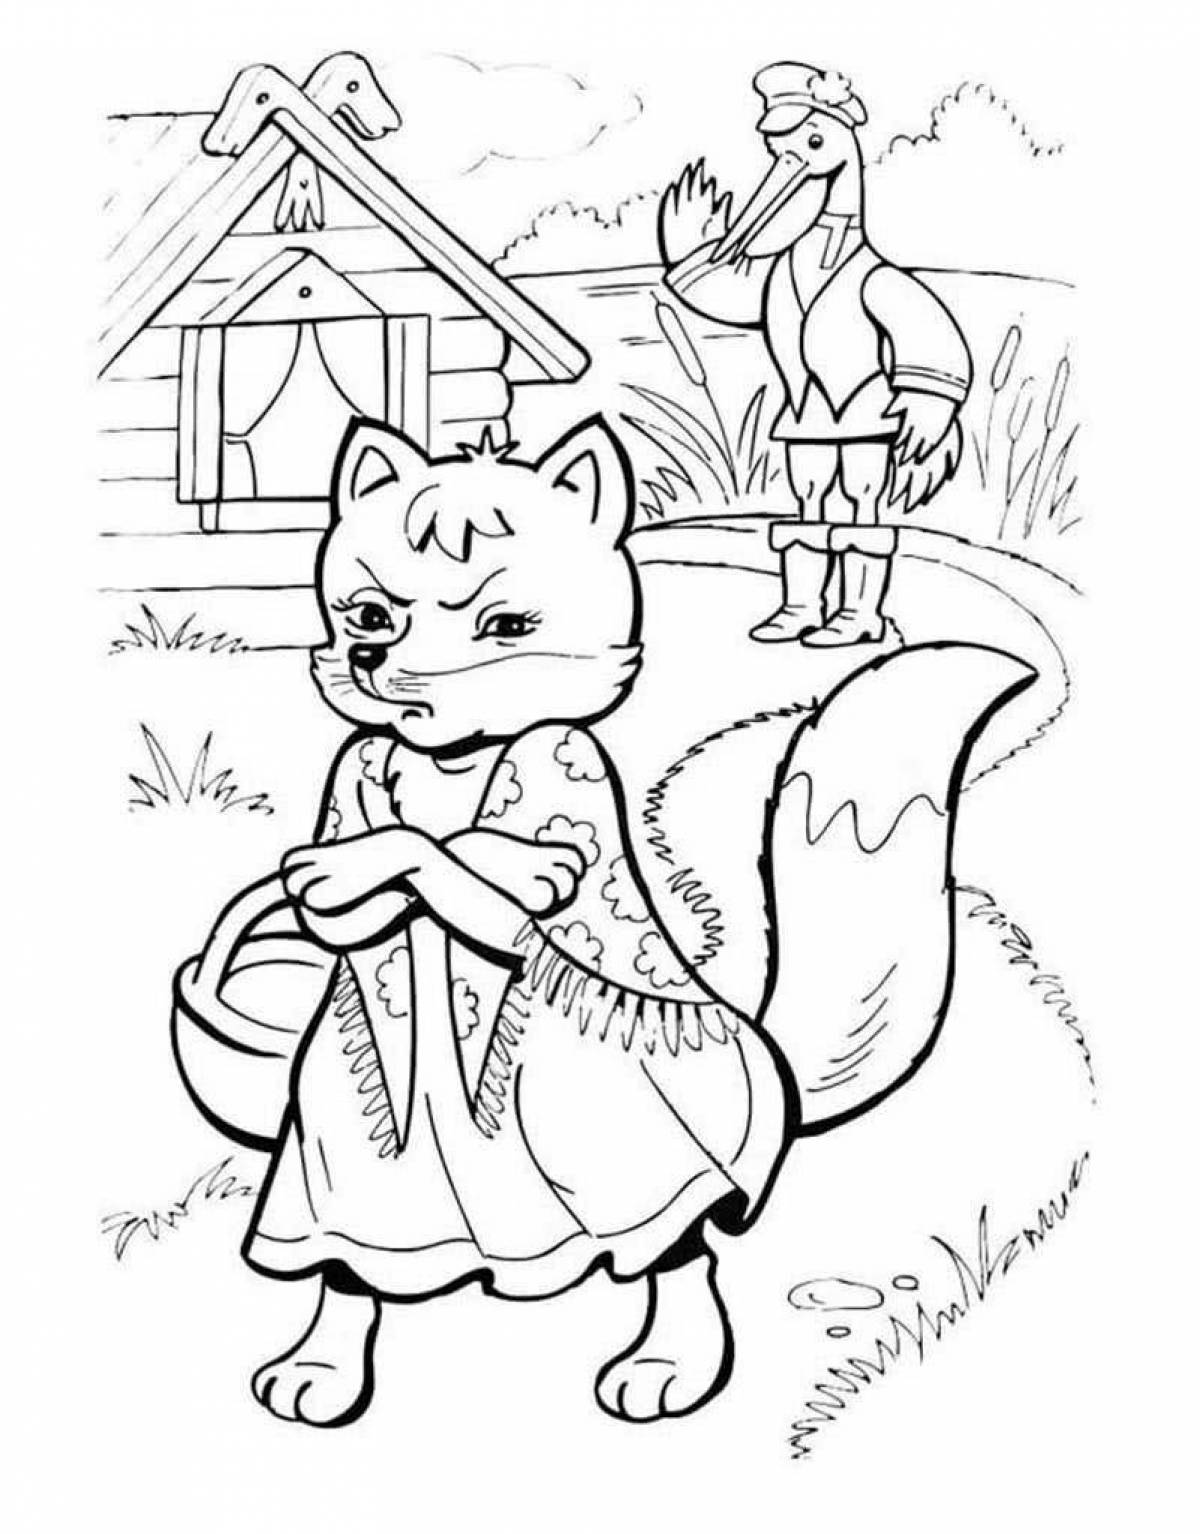 Delightful coloring book tale of the cat and the fox